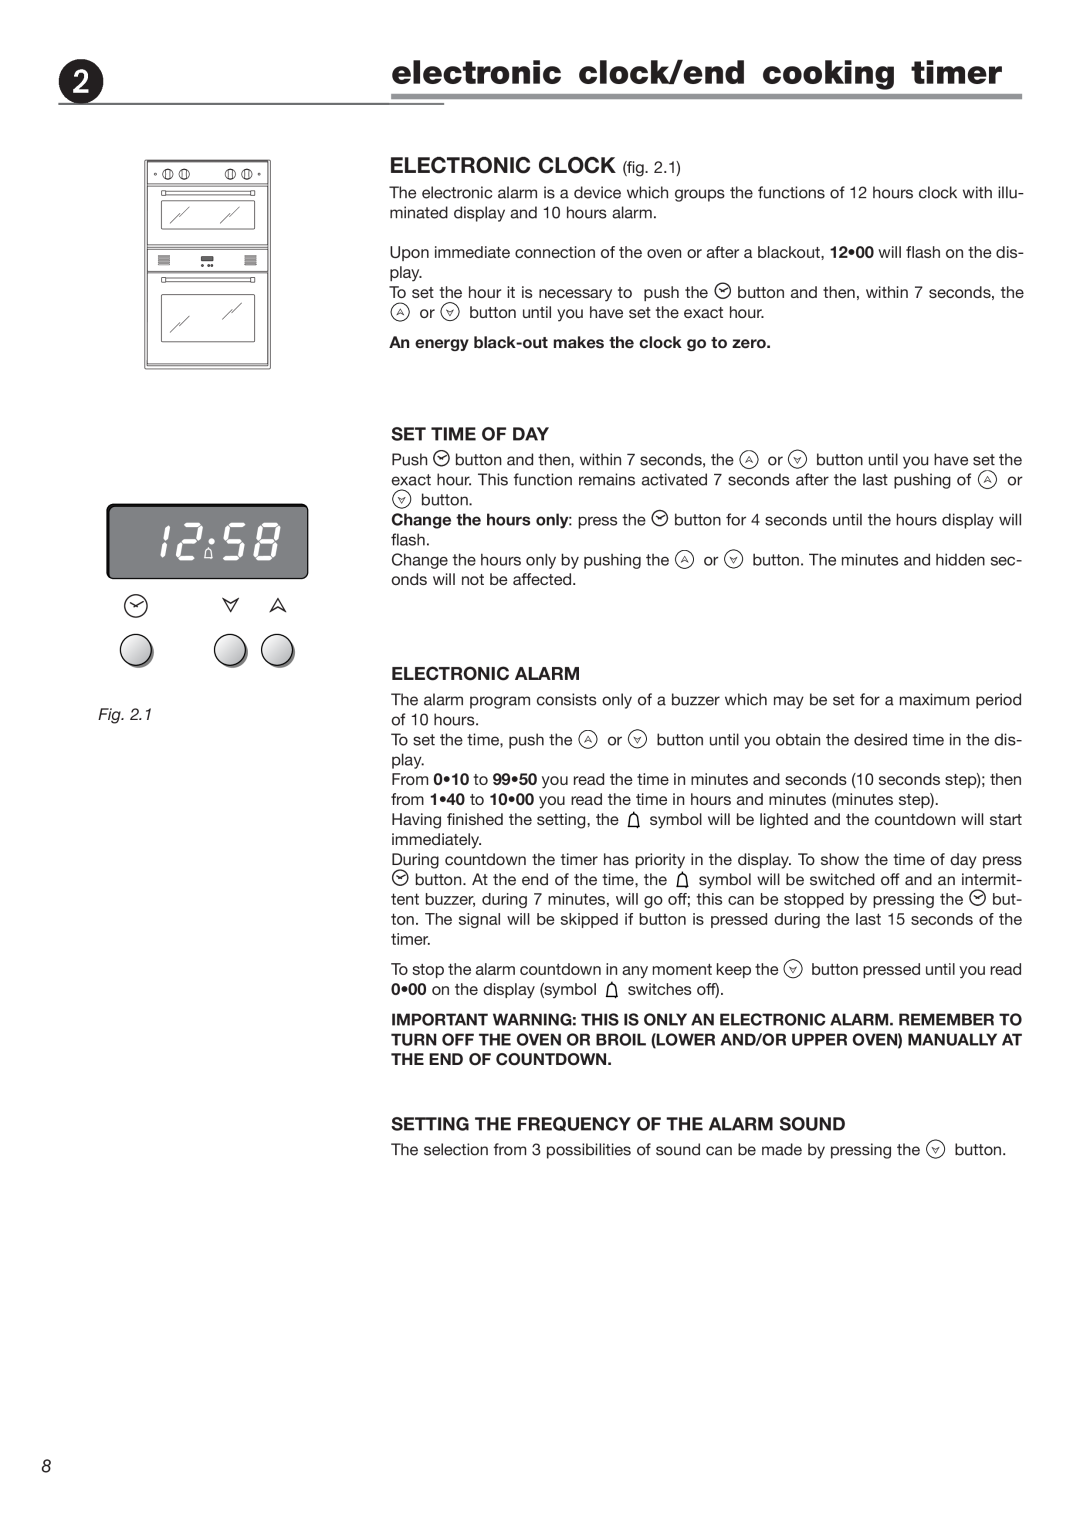 DeLonghi DEBIGE 2440 E warranty electronic clock/end cooking timer, ELECTRONIC CLOCK fig, Set Time Of Day, Electronic Alarm 